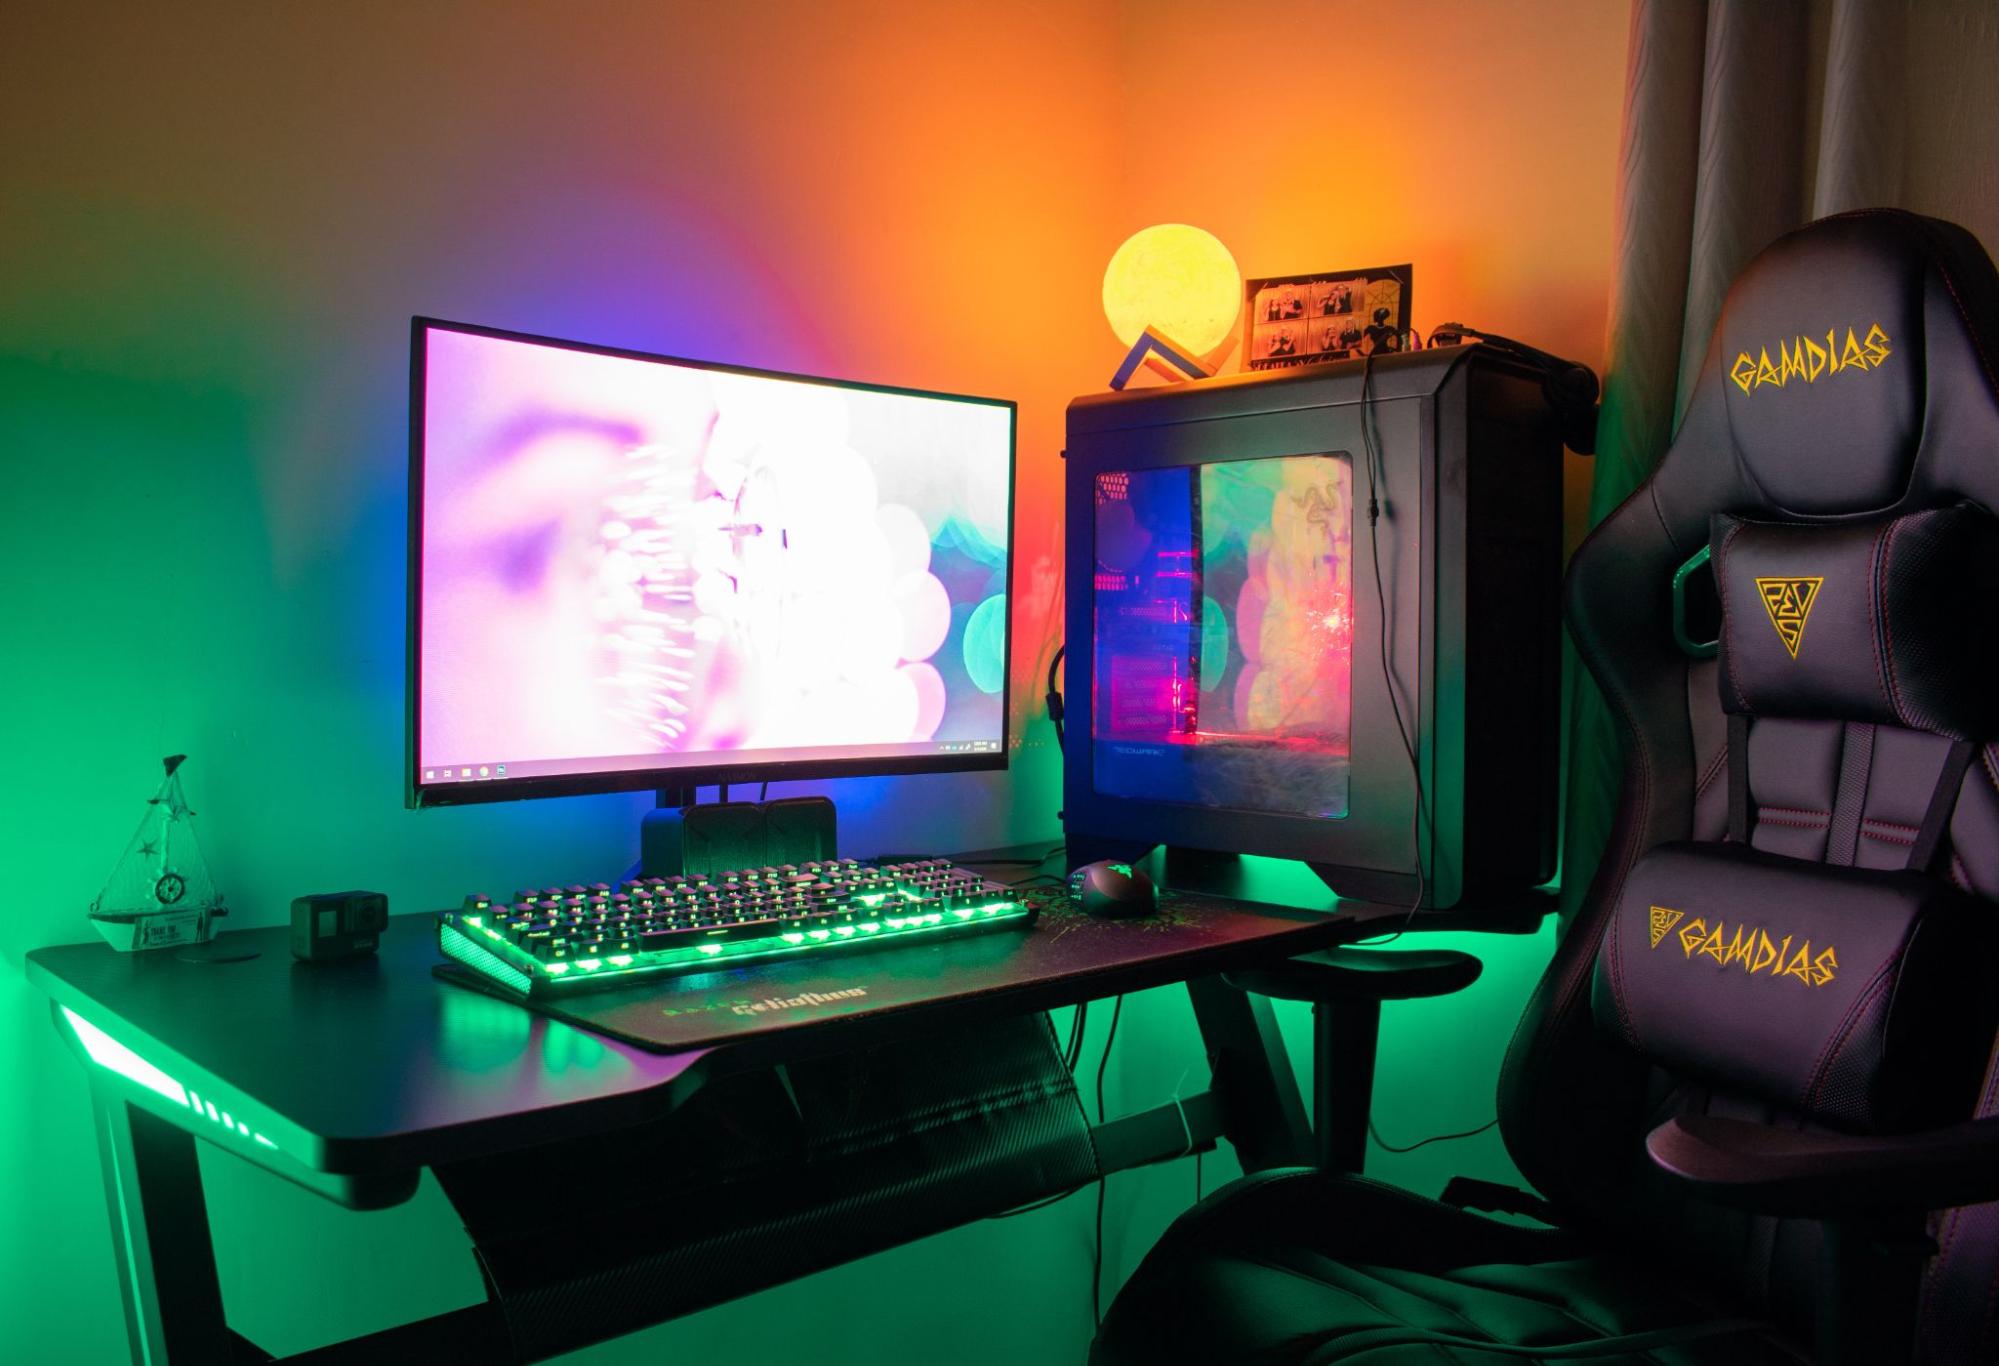 Gaming PCs and gaming desktop computers are changing the gaming arena, making them more sophisticated and complex.